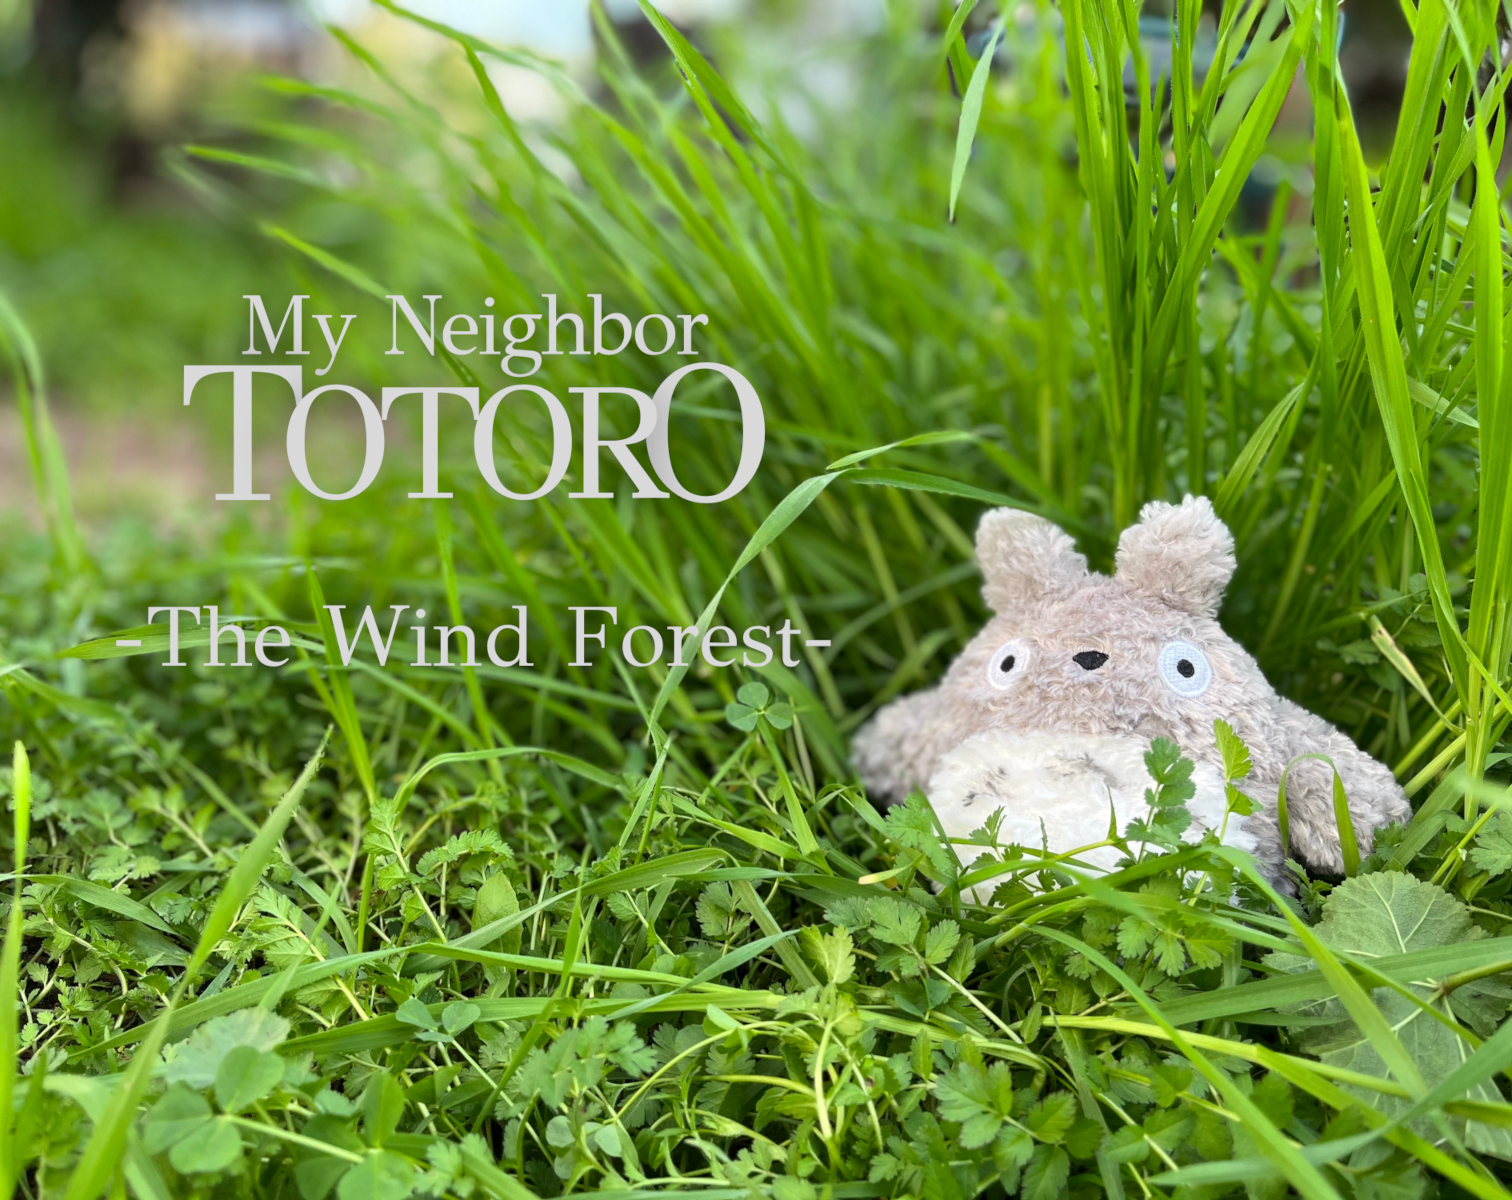 The Wind Forest - My Neighbor Totoro